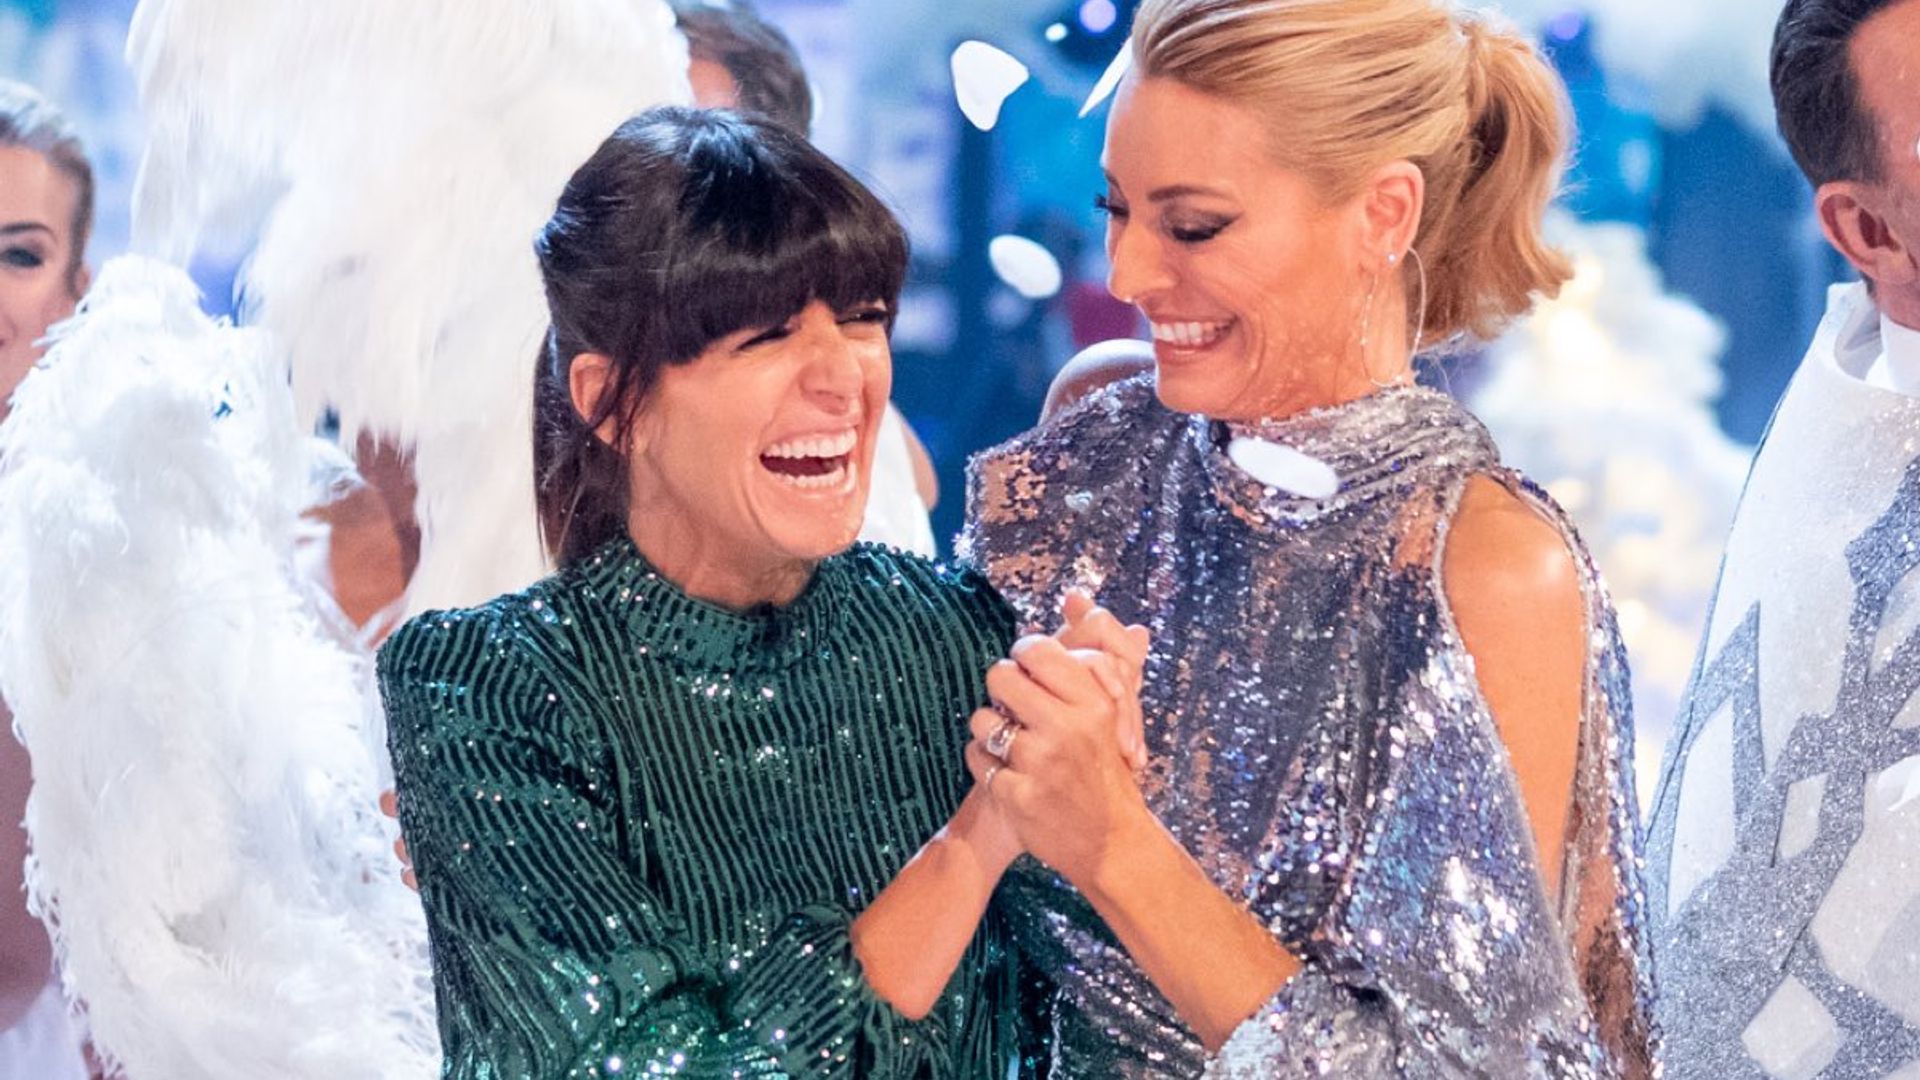 Love Tess Daly & Claudia Winkleman's sequin dresses on Strictly Christmas? This is how you can buy them 